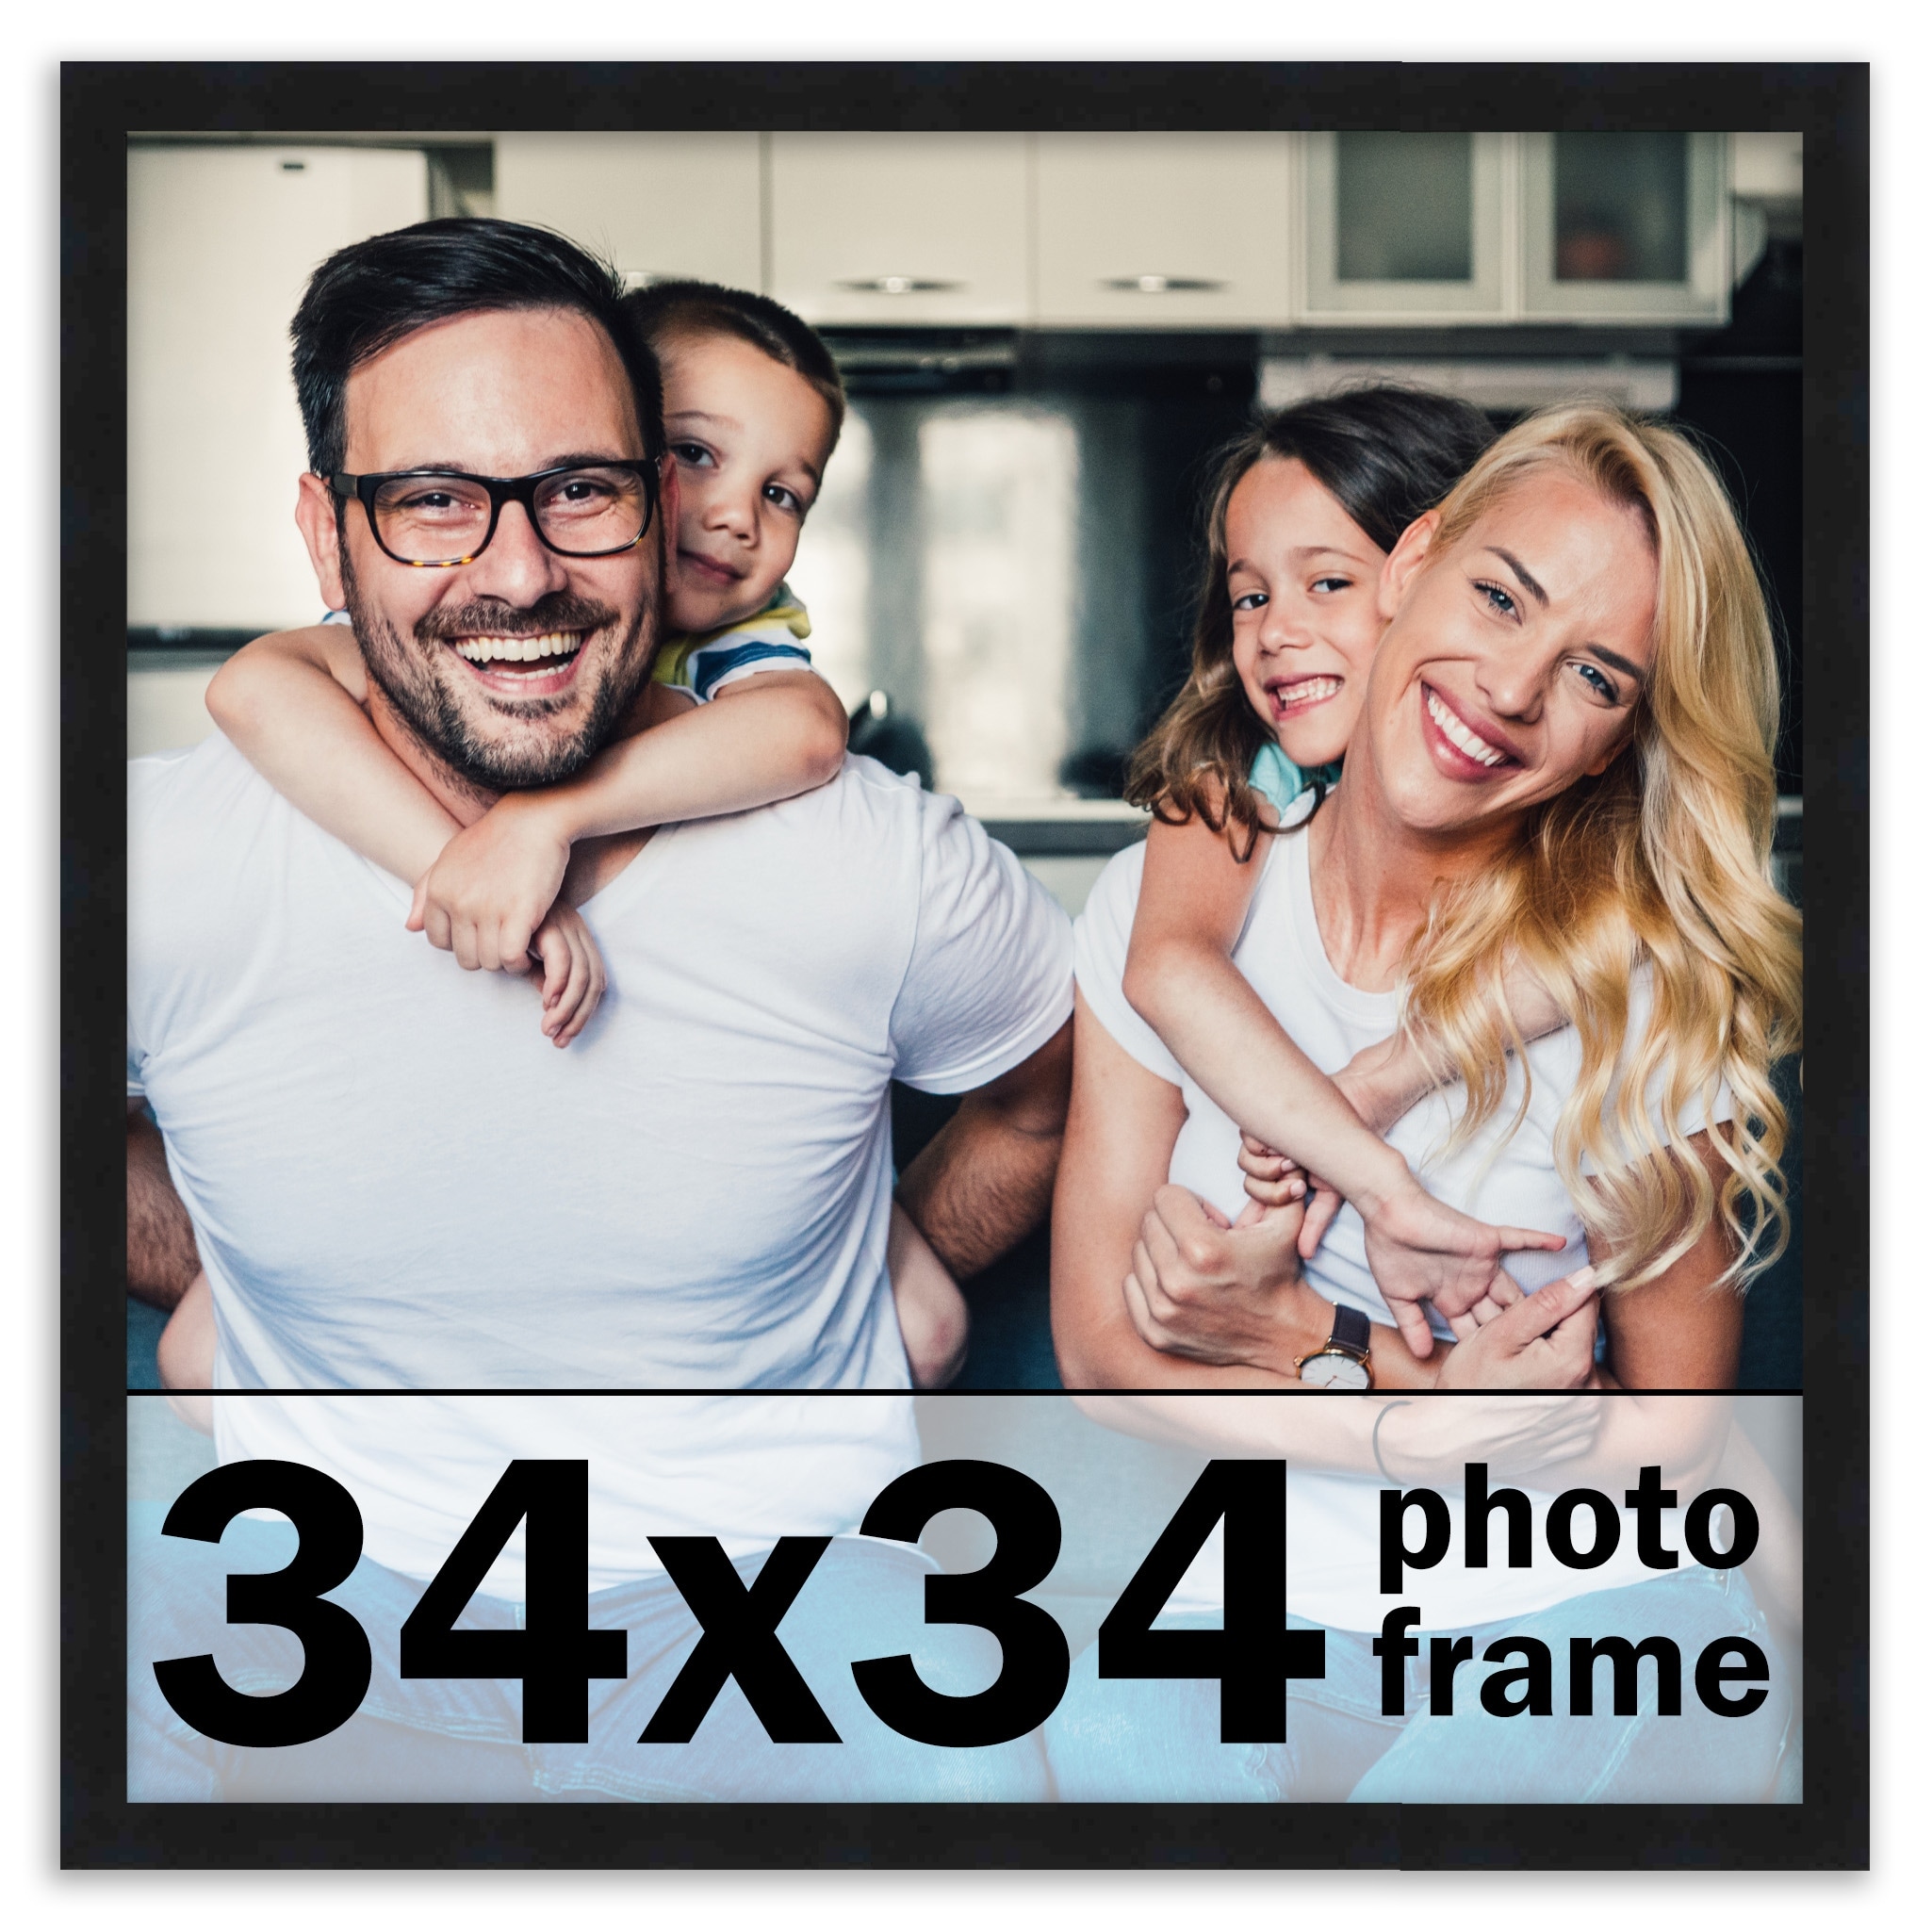 CustomPictureFrames.com 12x12 Frame White Matted for 12x12 Picture or 15x15 Art Poster Without Photo Mat - Display Your 12 x 12 Decor Prints Under UV